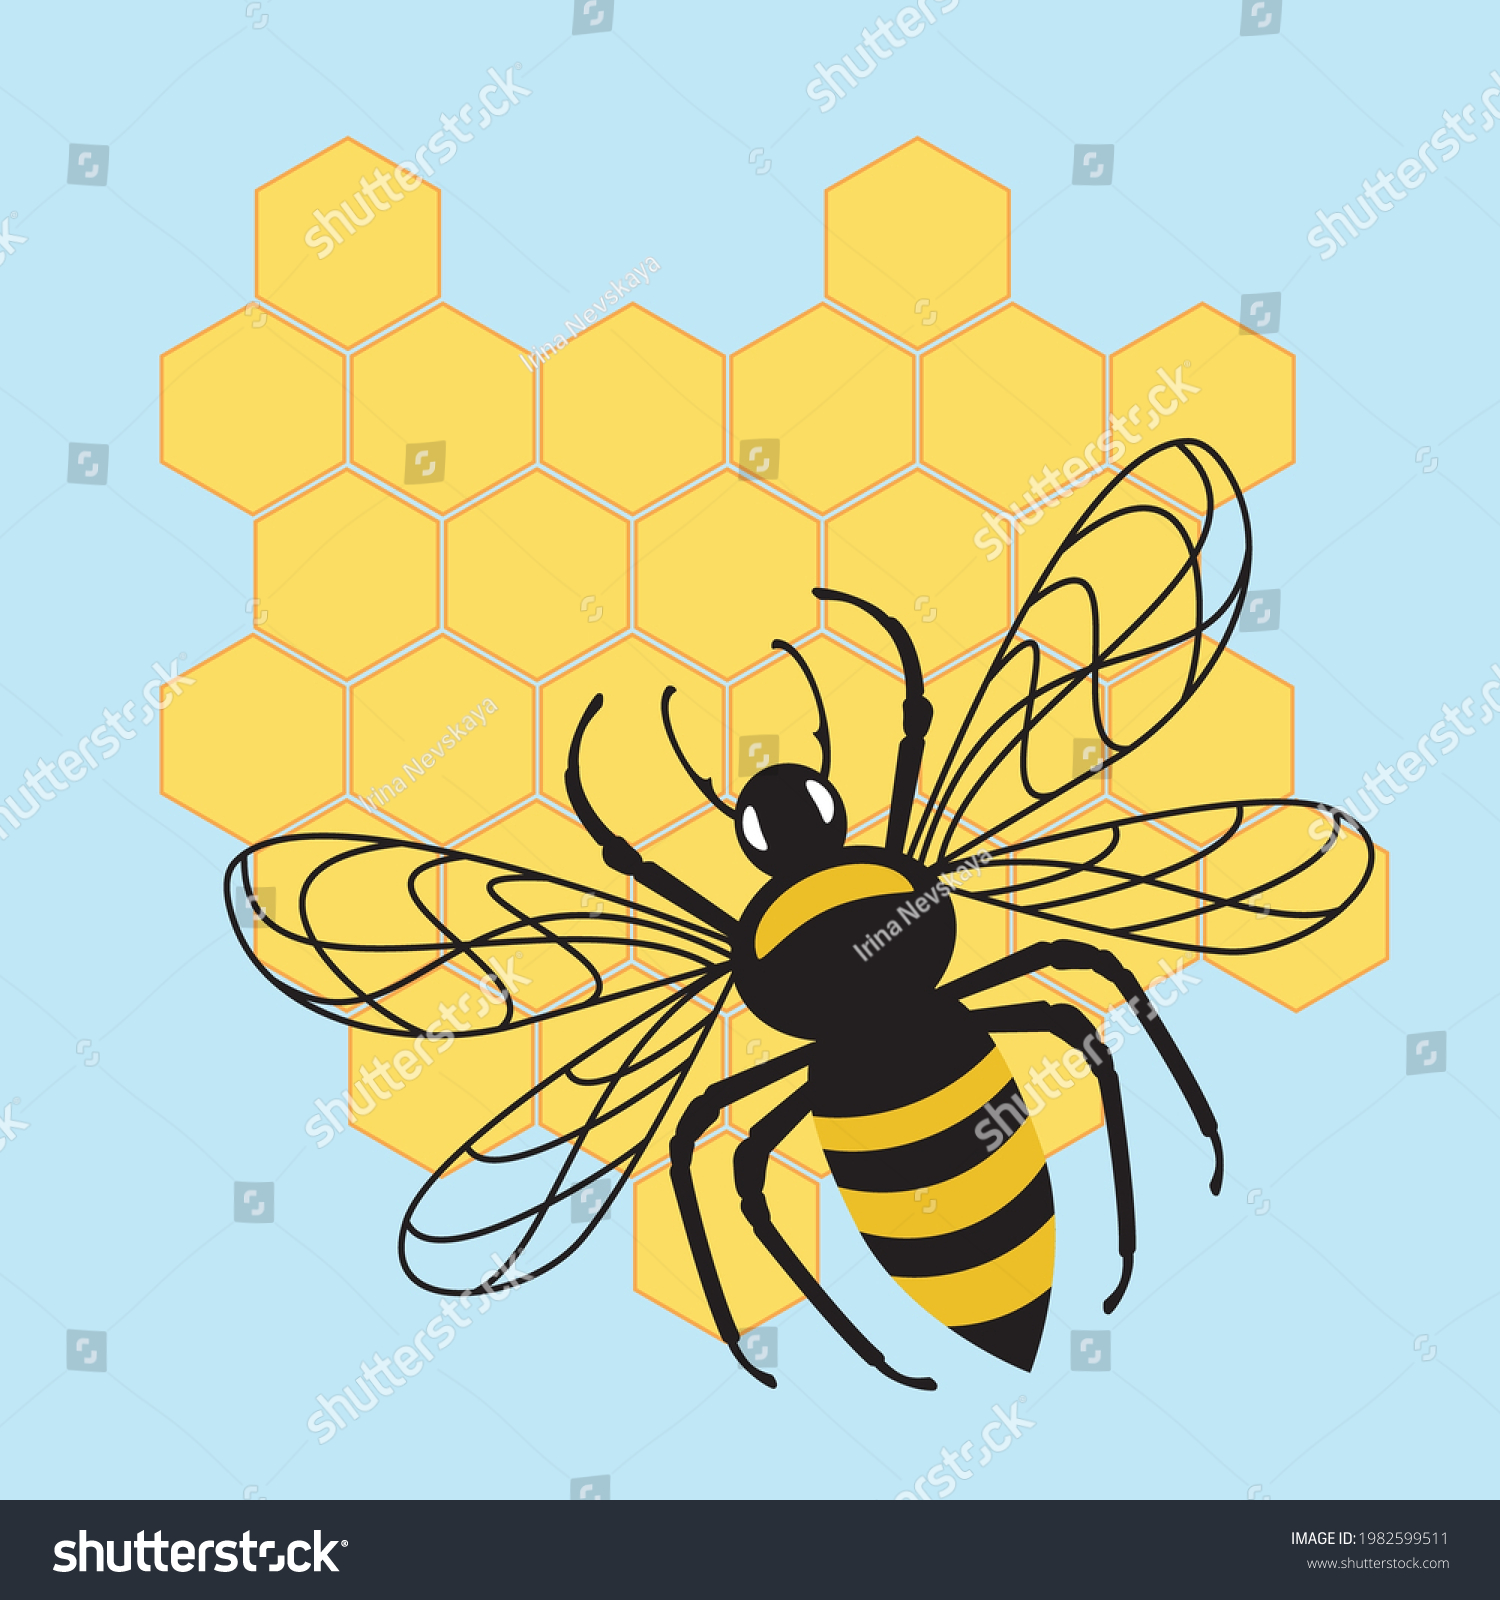 SVG of Honey bee isolated on white background. Vector illustration depicting an insect. For the Day of Protection of Bees. Save the bees. Suitable for cutting SVG files on plotter. Bumblebee for shirt design svg